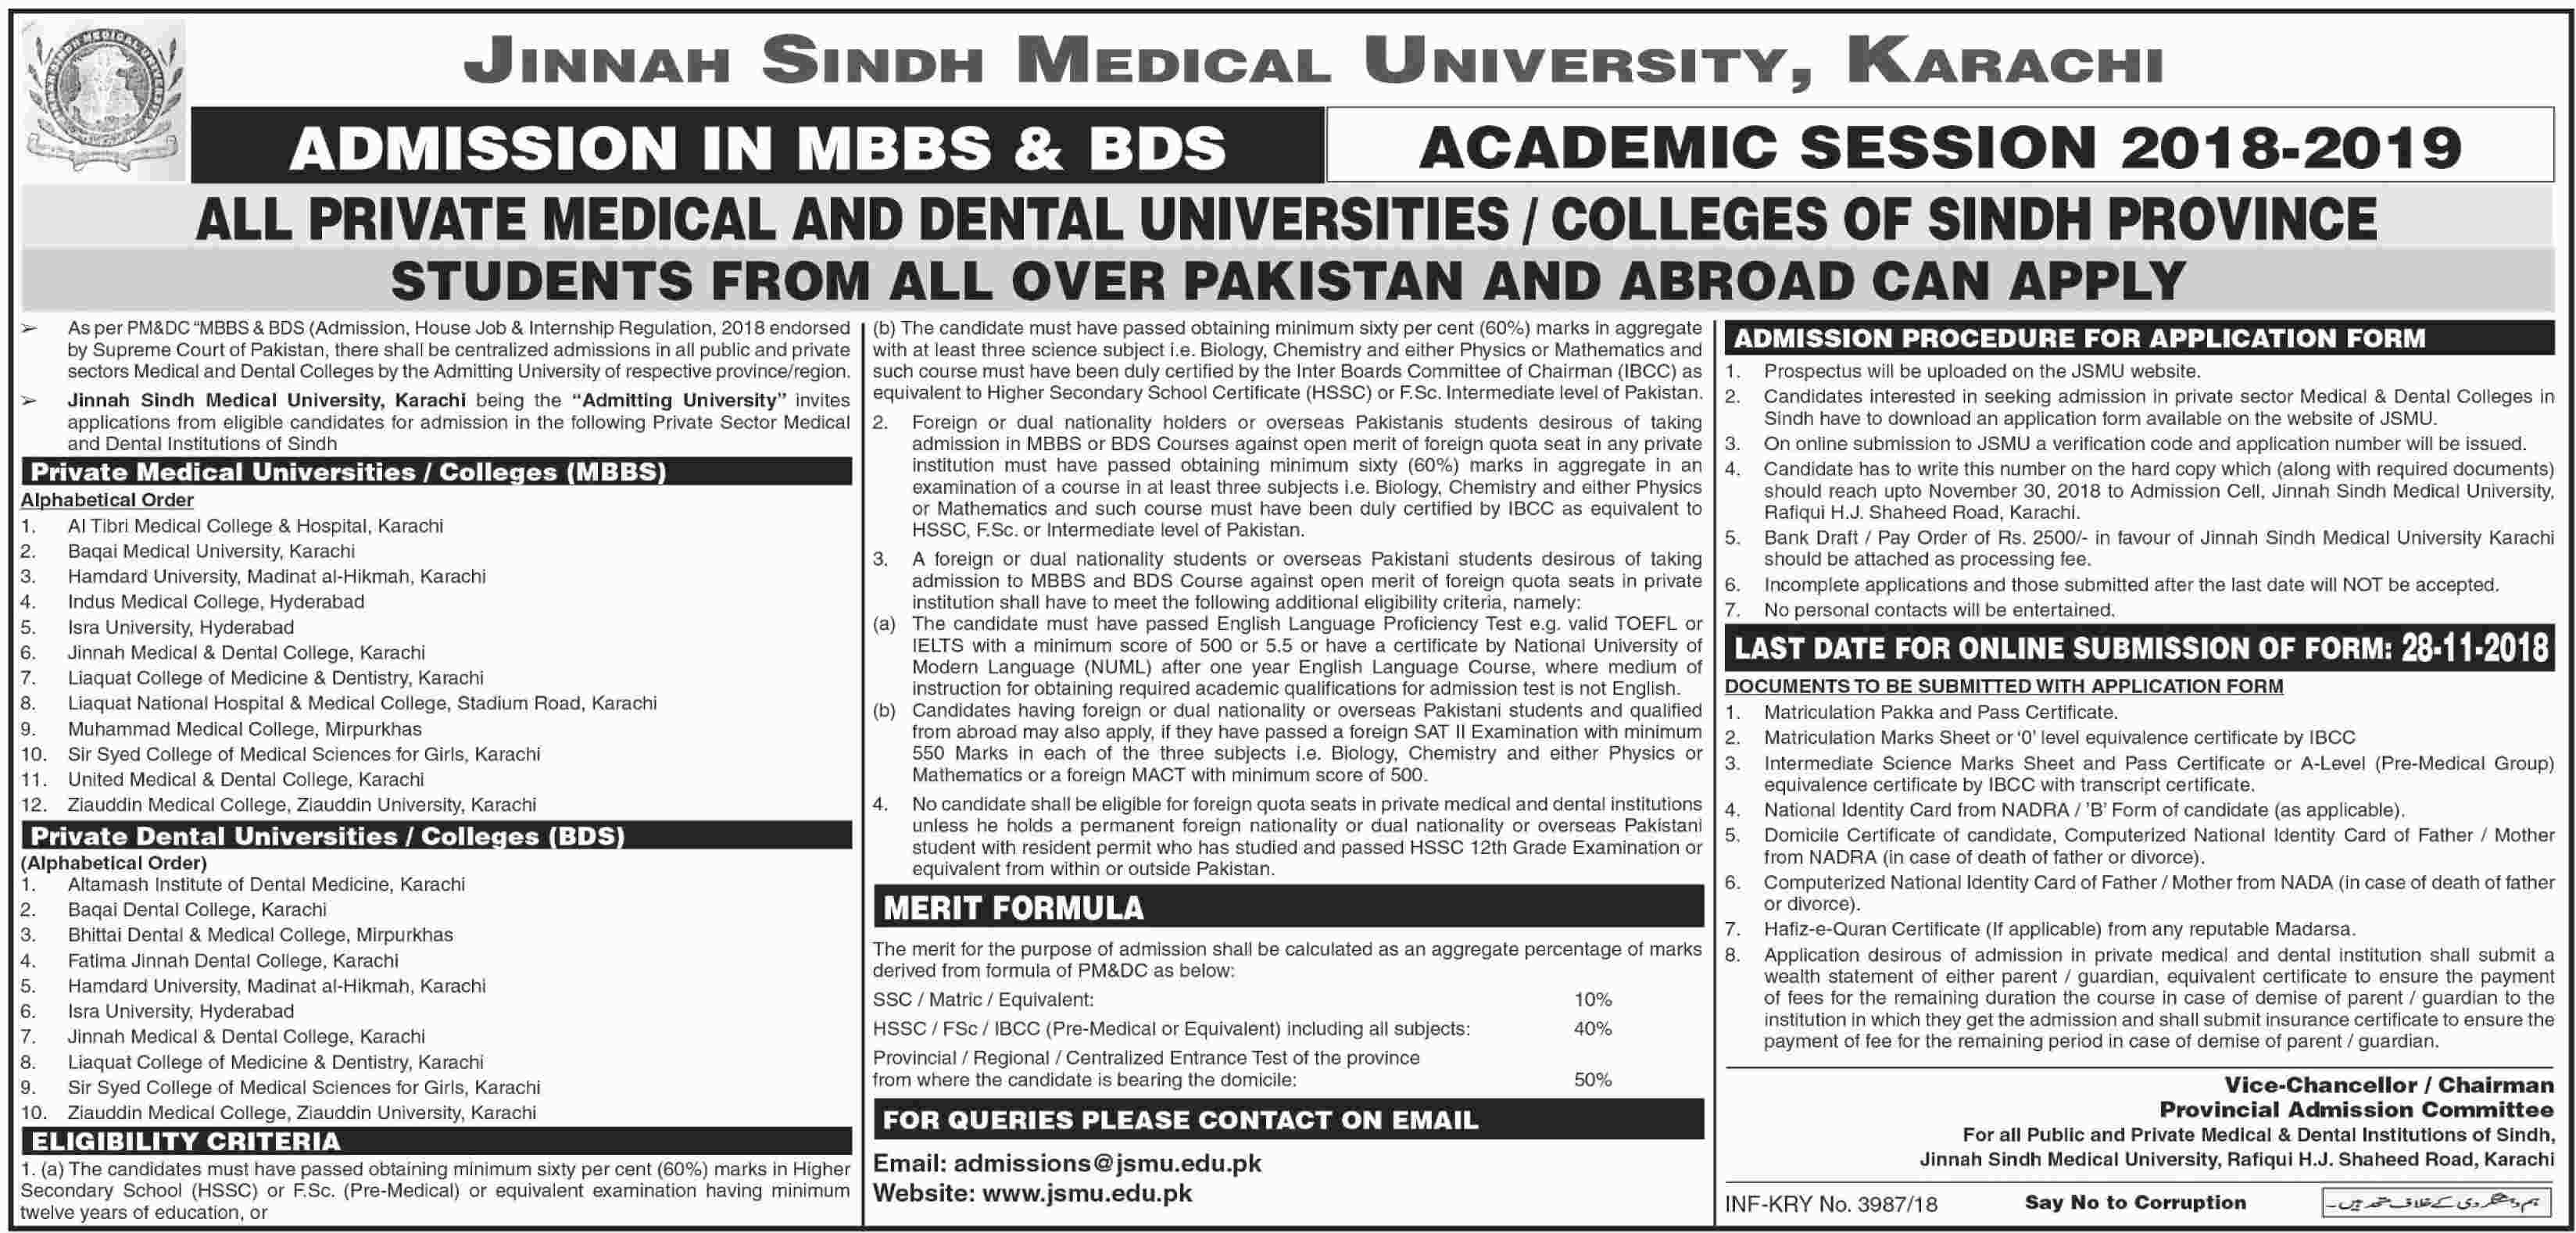 This admission notice is announced by Jinnah Sindh Medical University Karac...